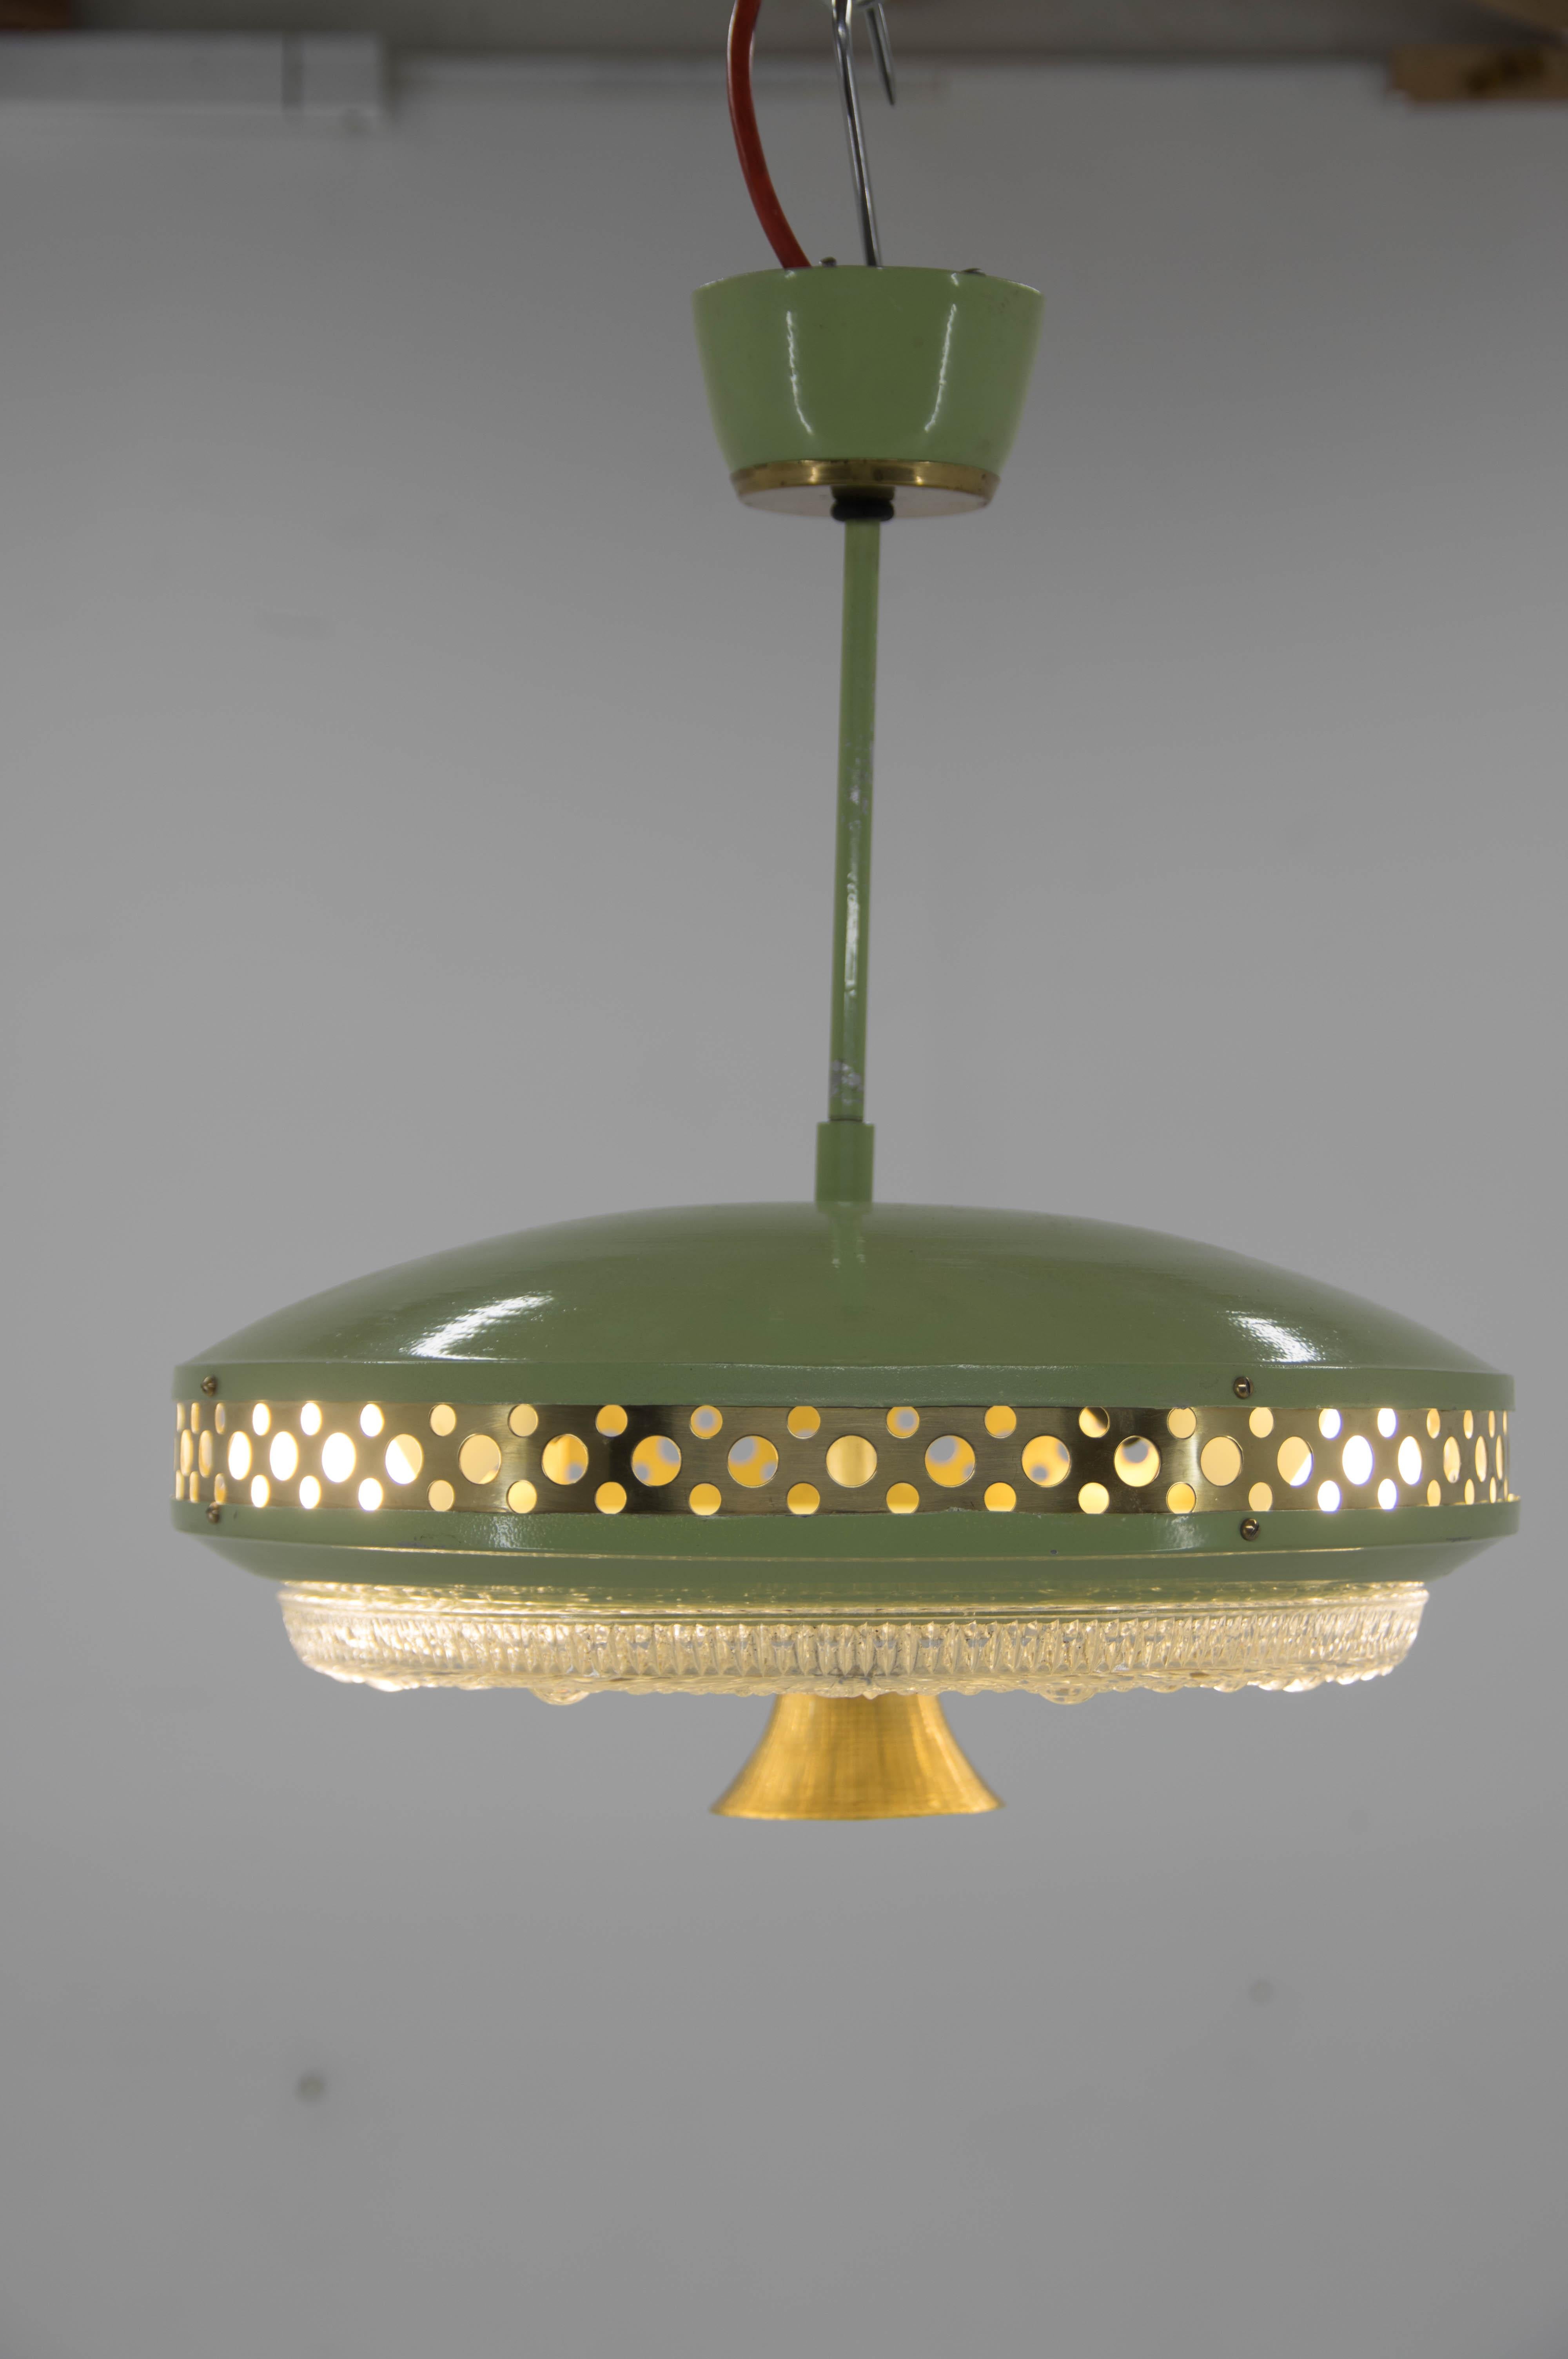 Green metal ring pendant with brass perforated strip by LUDIB Bratislava, Czechoslovakia, 1960s.
Very good original condition
2x60W, E25-E27 bulbs
US wiring compatible.